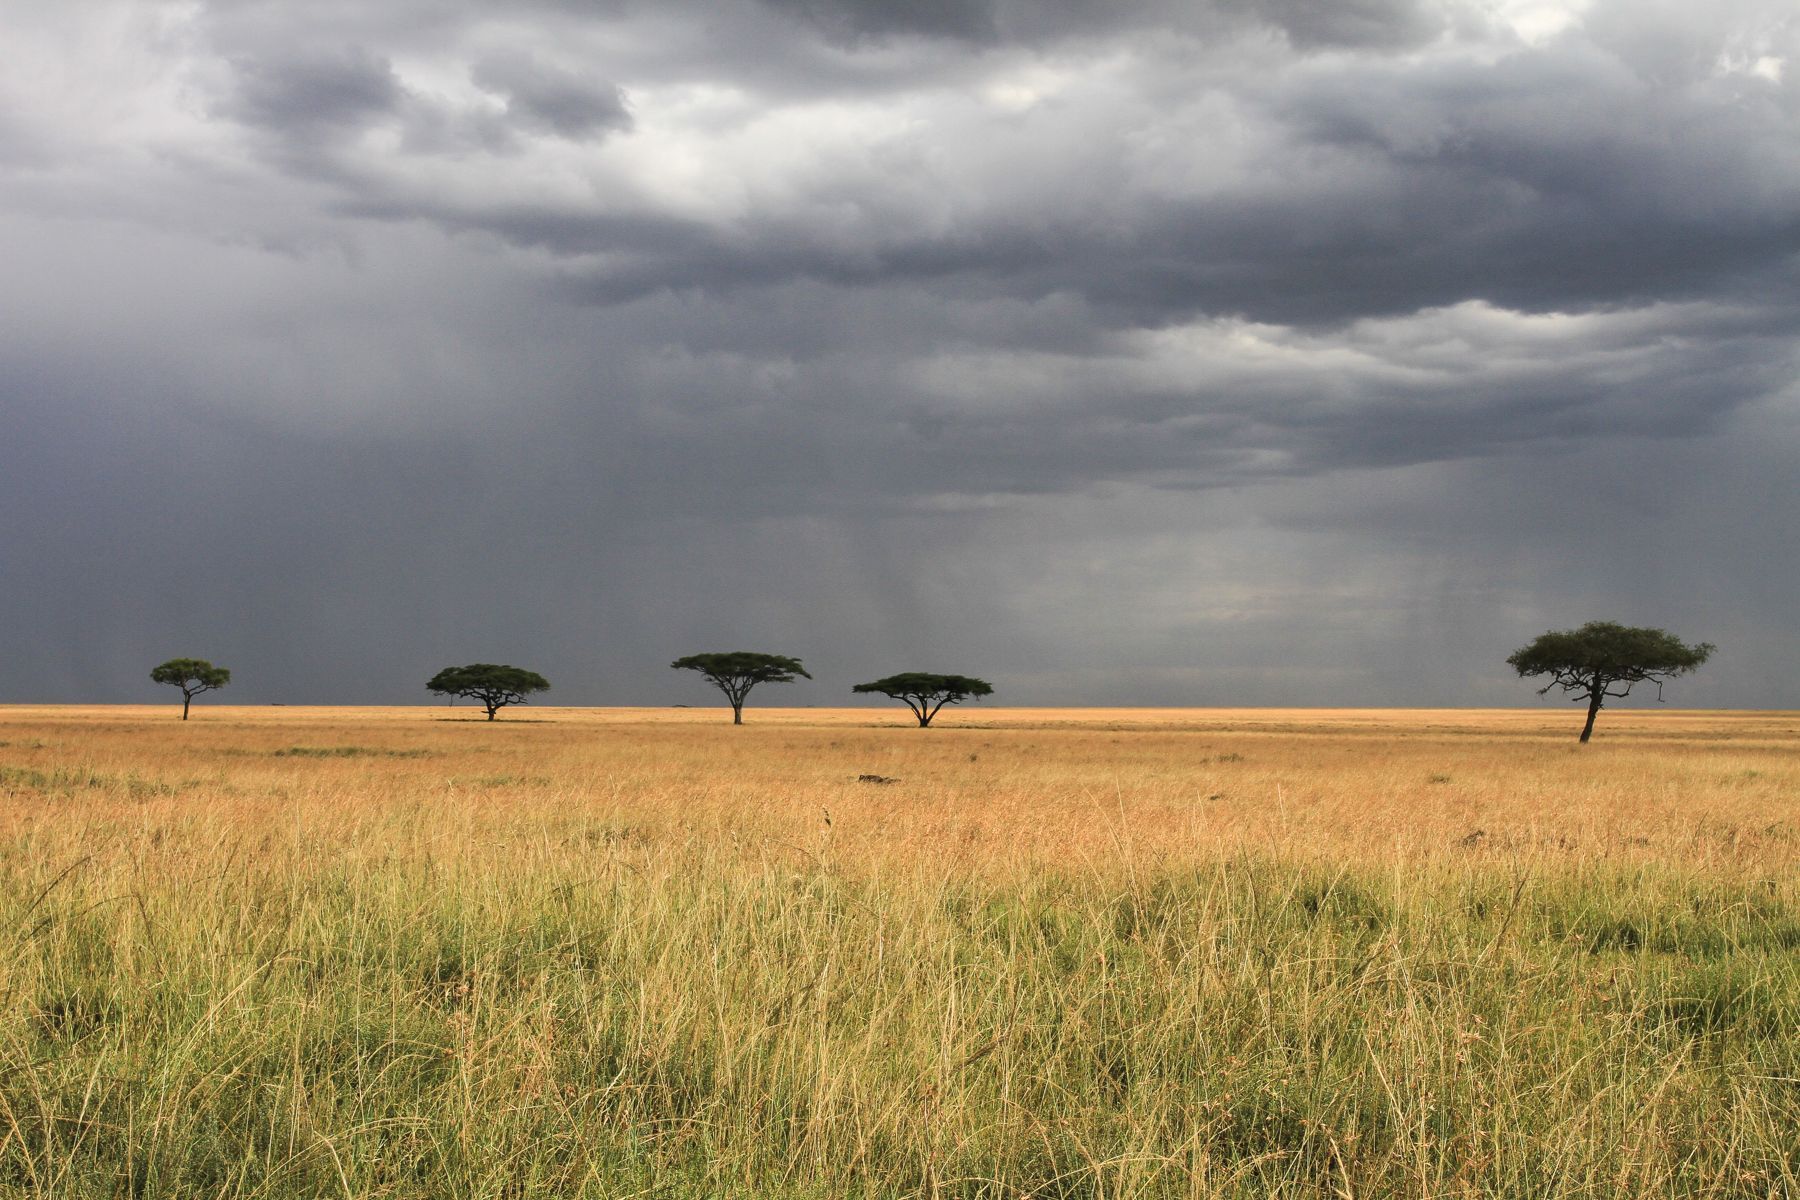 Each year, between March and May, the arrival of the rains creates a lush wildlife paradise in the southern Serengeti